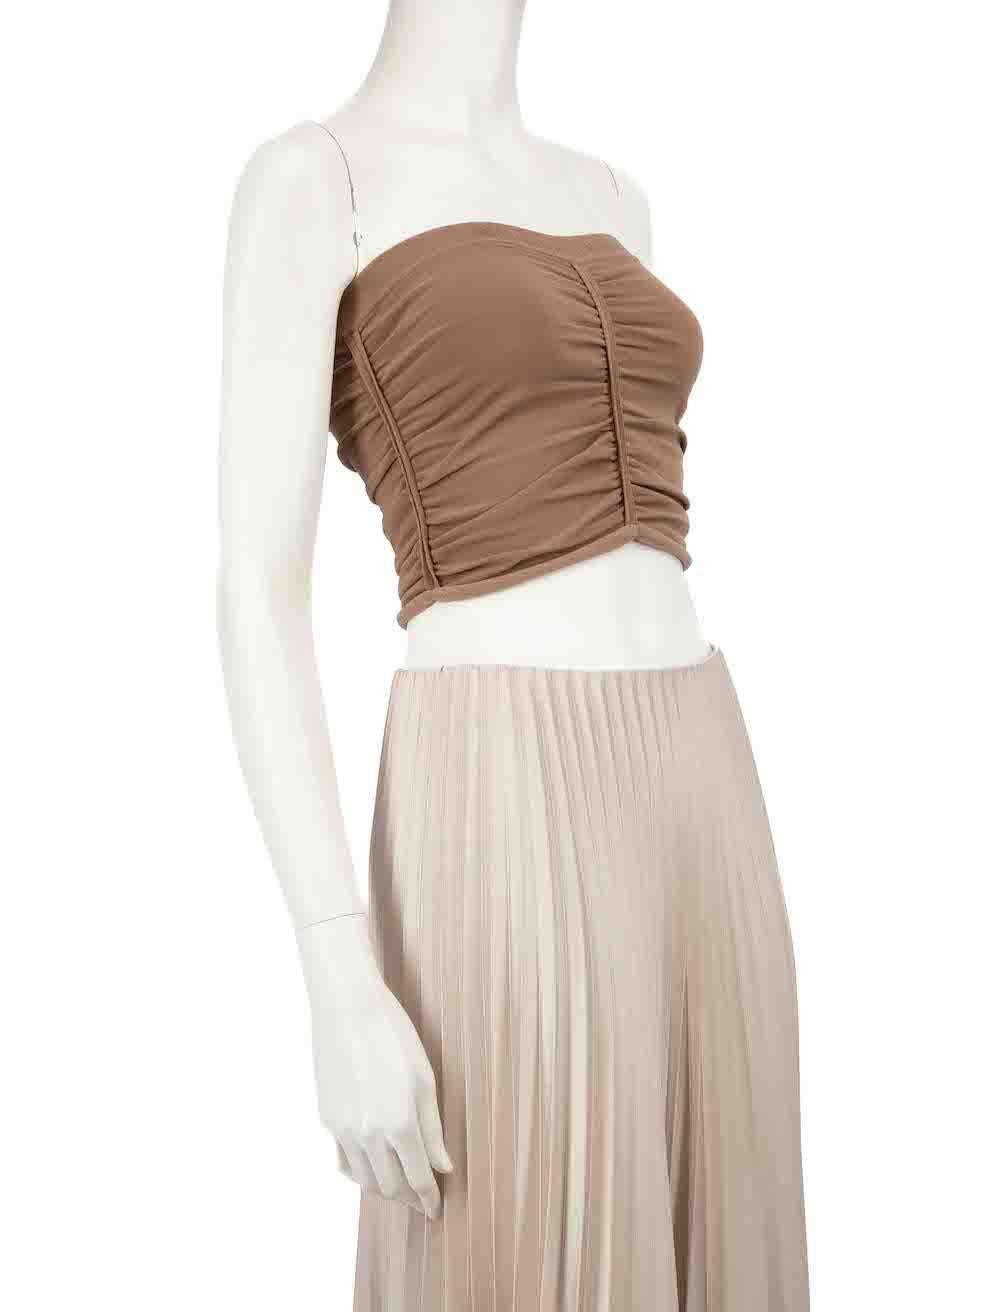 CONDITION is Very good. Hardly any visible wear to top is evident. However, one side of the brand label is unstitched on this used Alexander Wang designer resale item.
 
 
 
 Details
 
 
 Brown
 
 Synthetic
 
 Tube top
 
 Sleeveless and strapless
 
